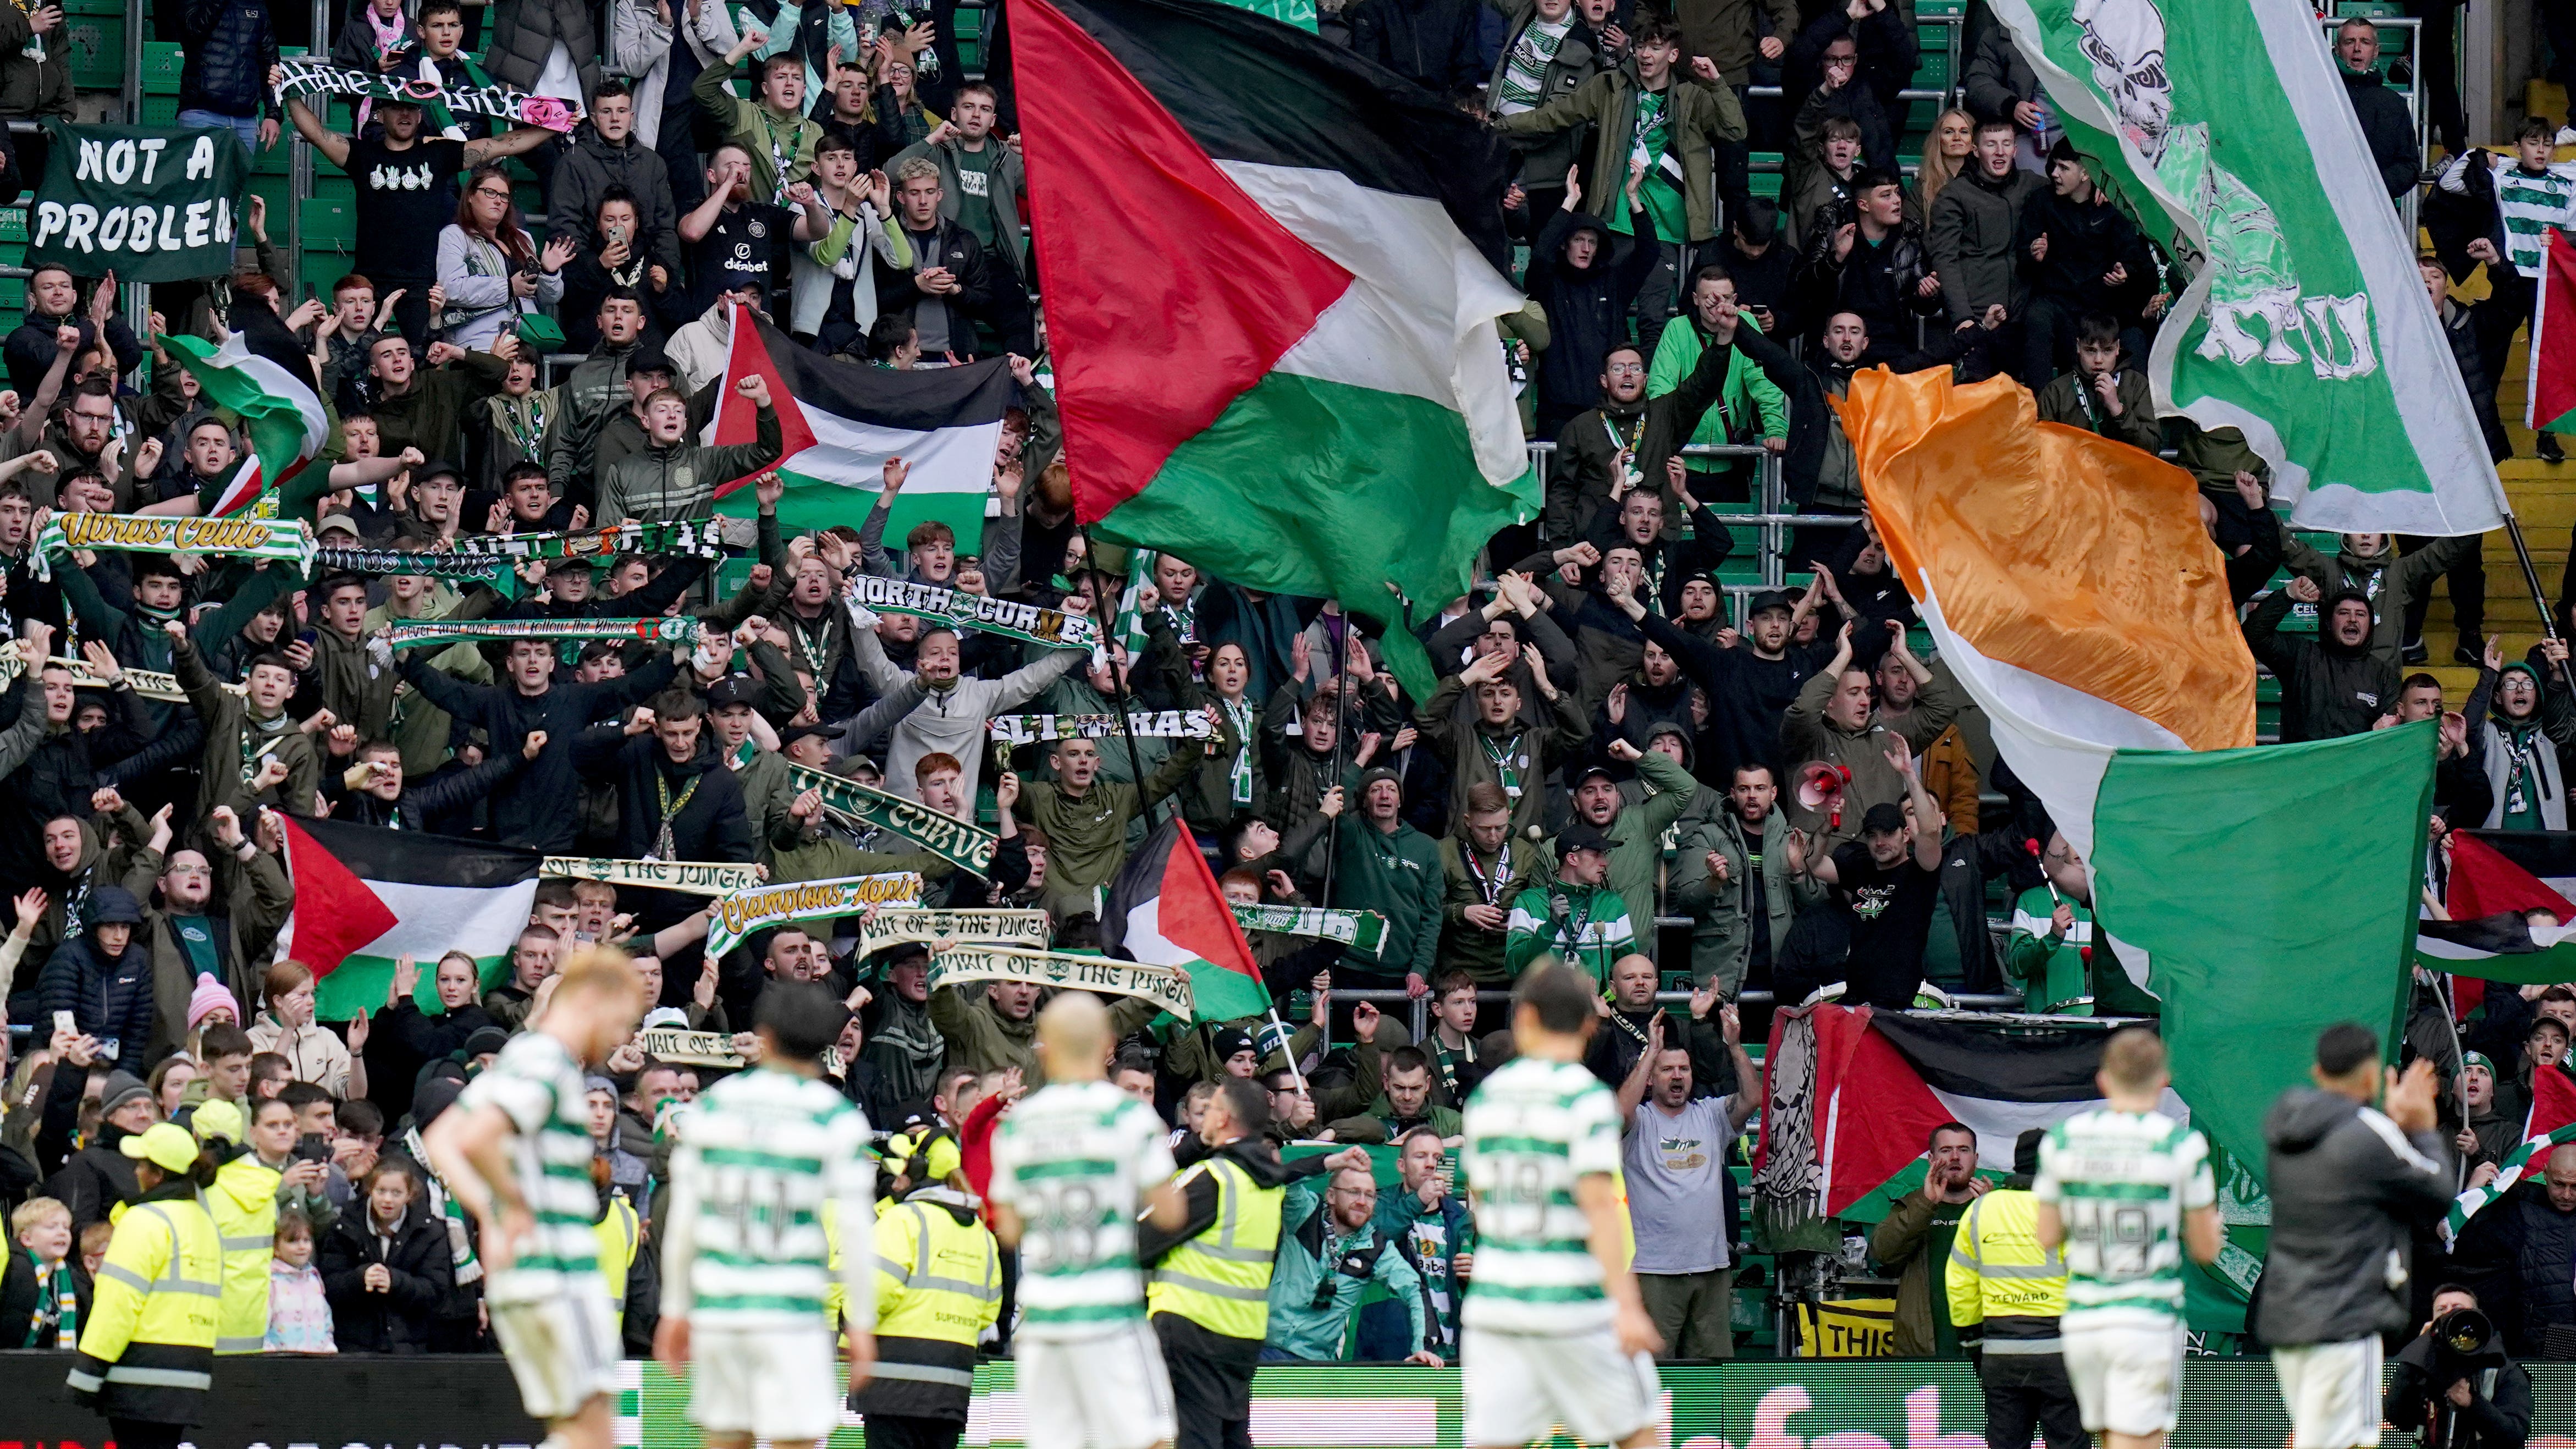 Fans group vow to defy Celtic board and ‘raise Palestine flag on European stage’